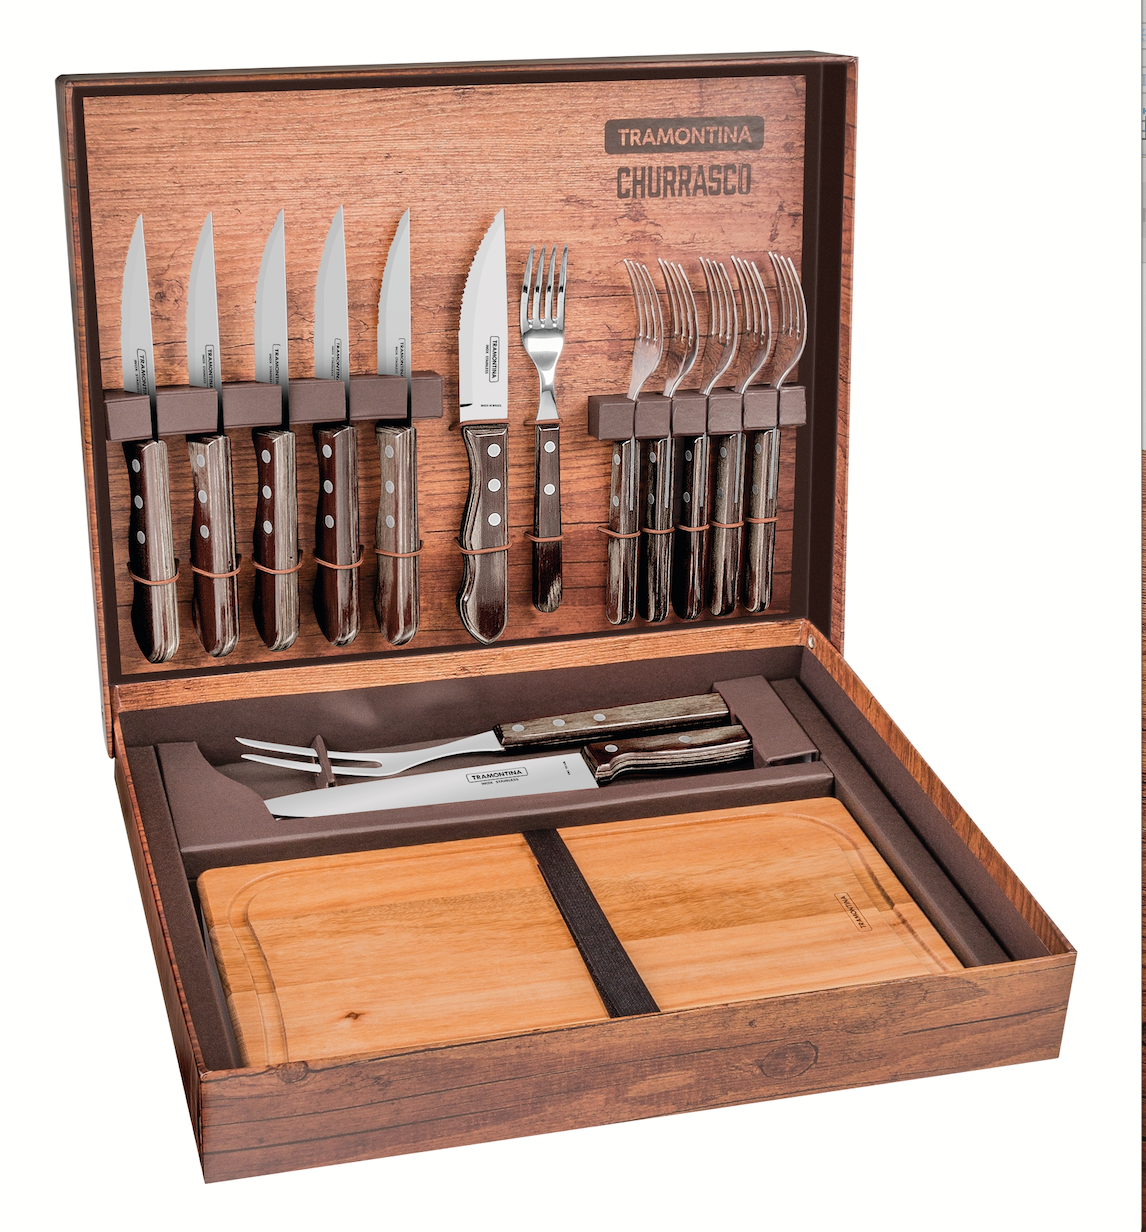 Tramontina Churrasco 15 pc cutlery and carving set